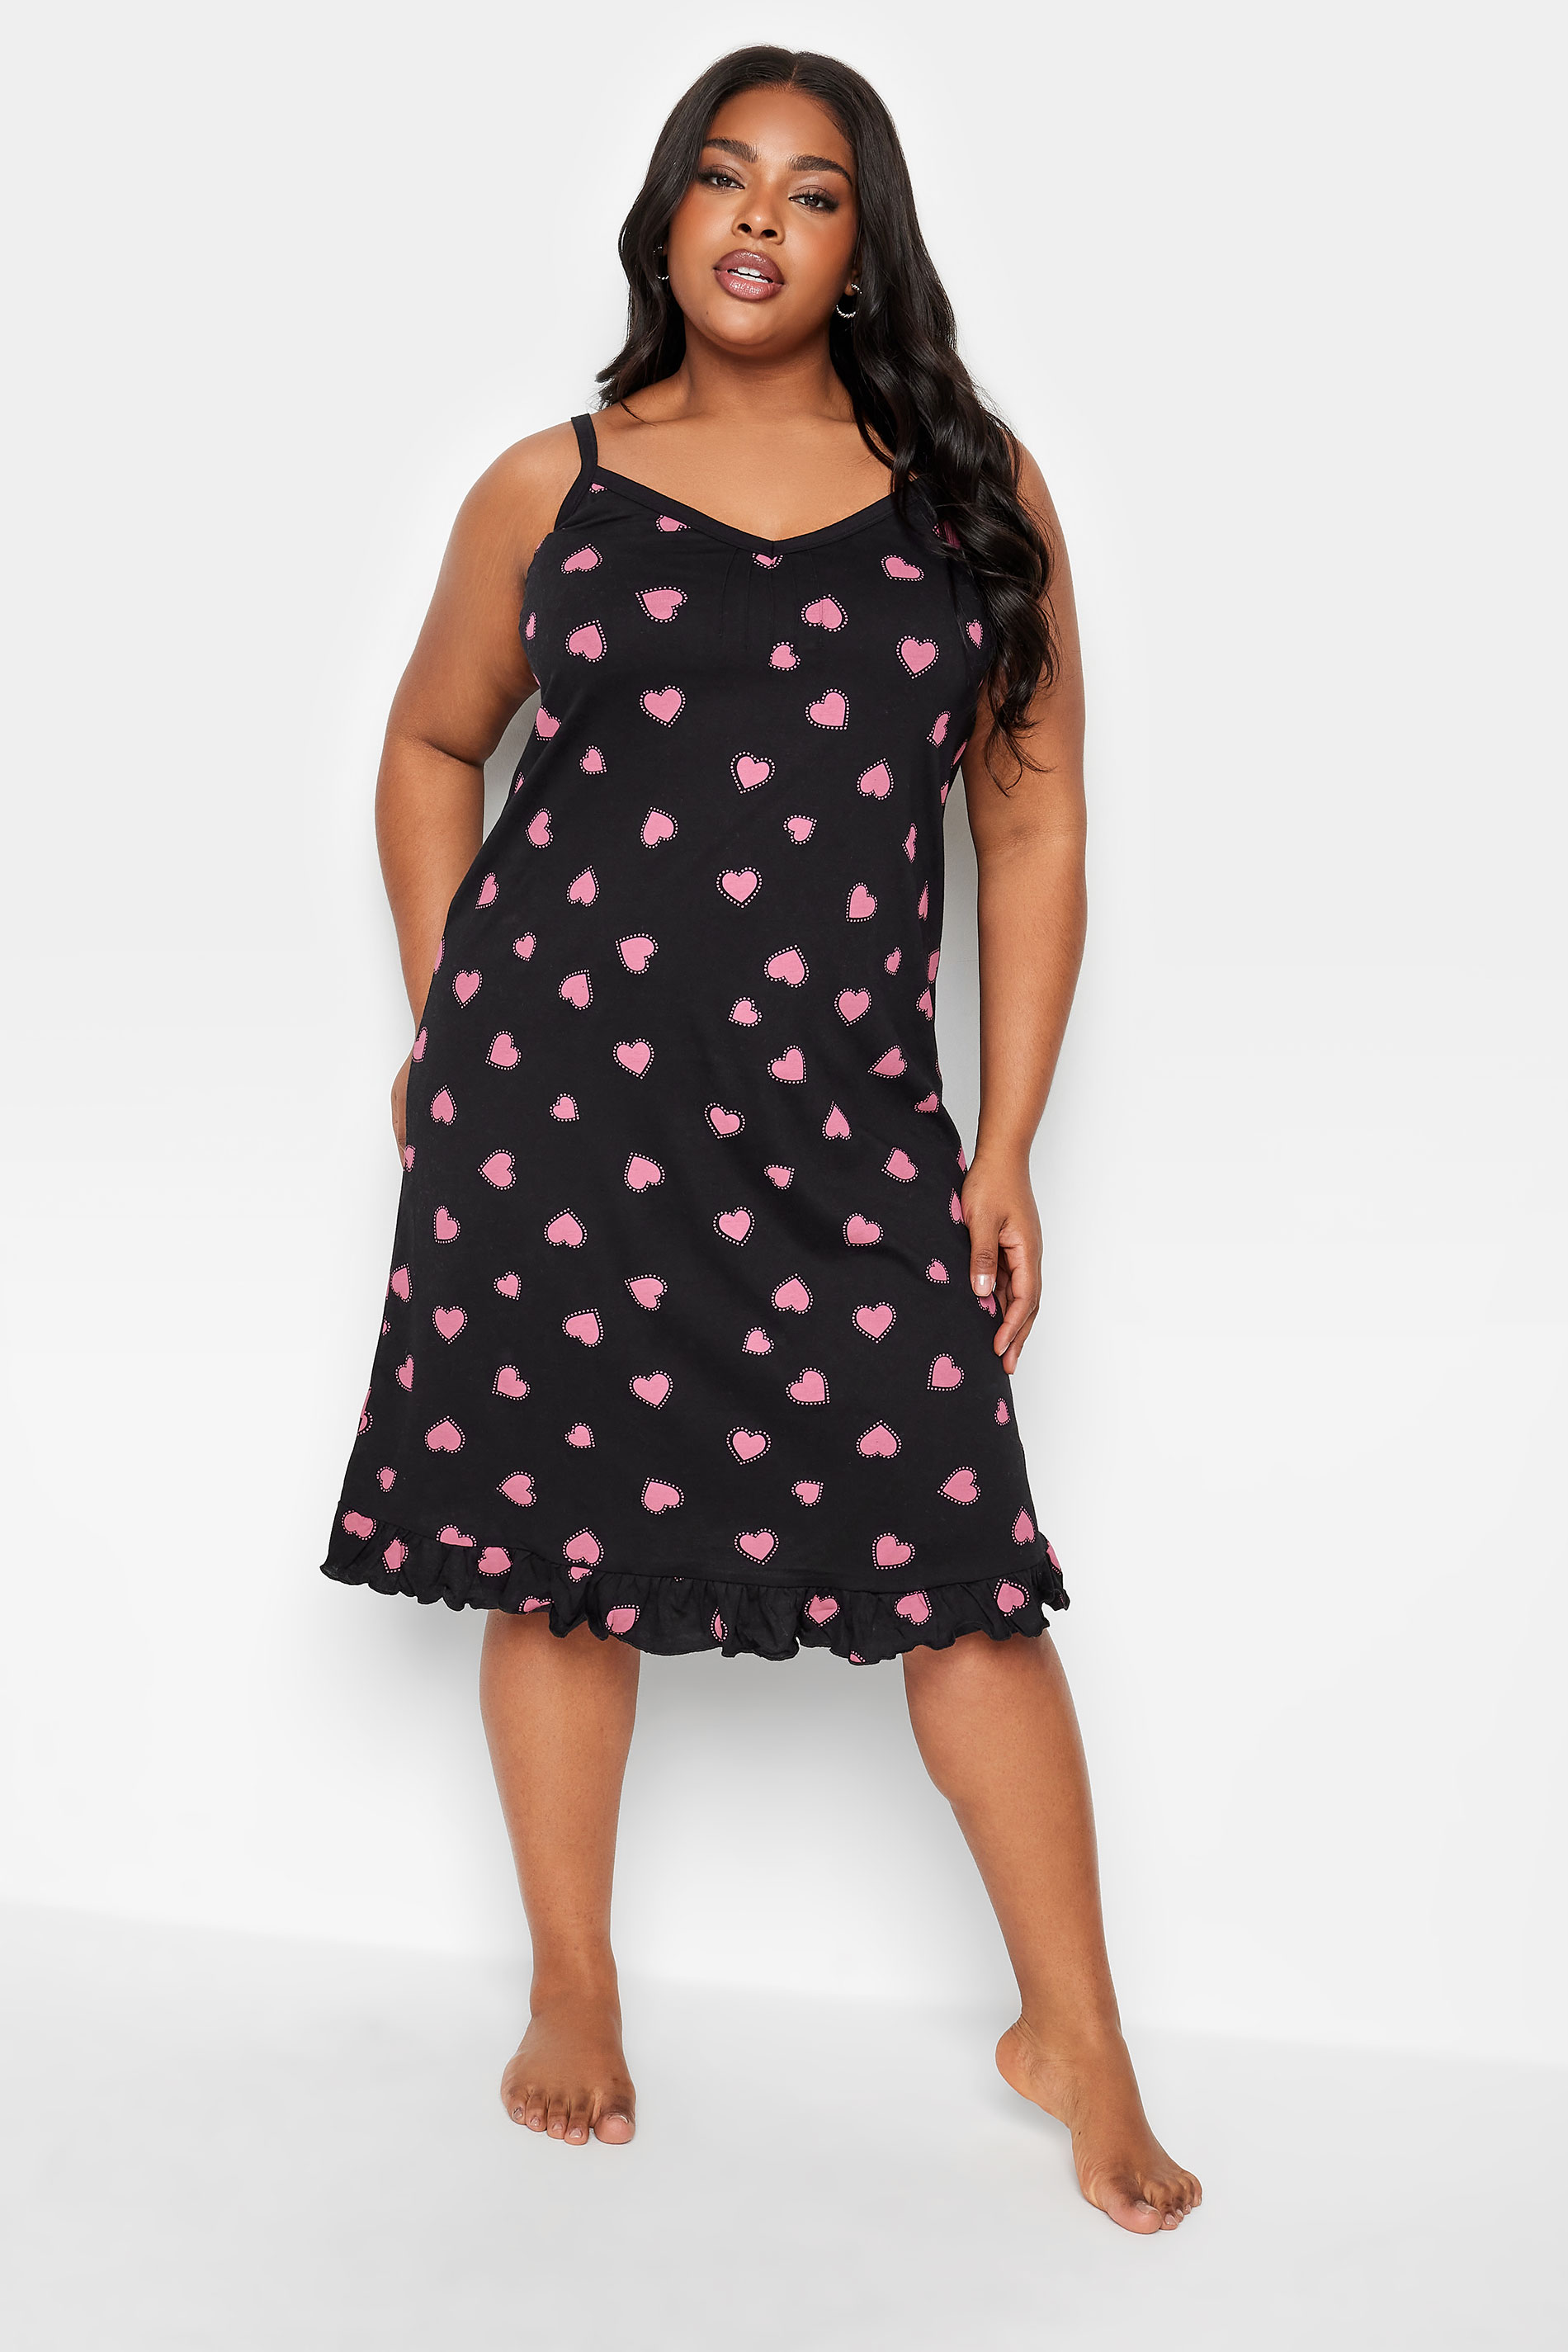 YOURS Plus Size Black Heart Print Chemise Nightdress | Yours Clothing 2